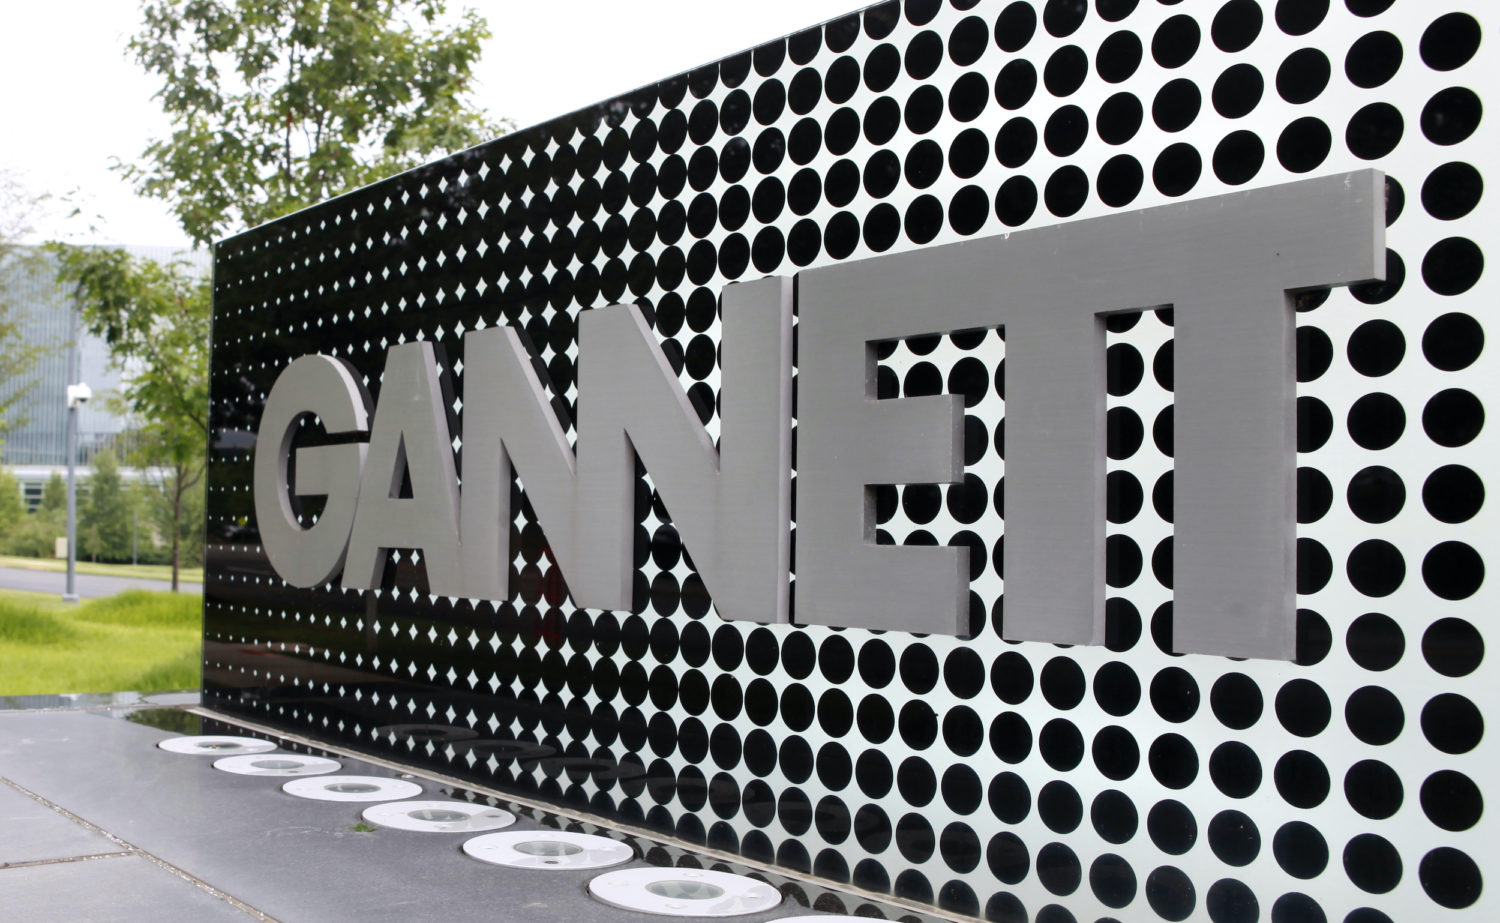 Gannett tells its news division that more layoffs are coming Dec. 1